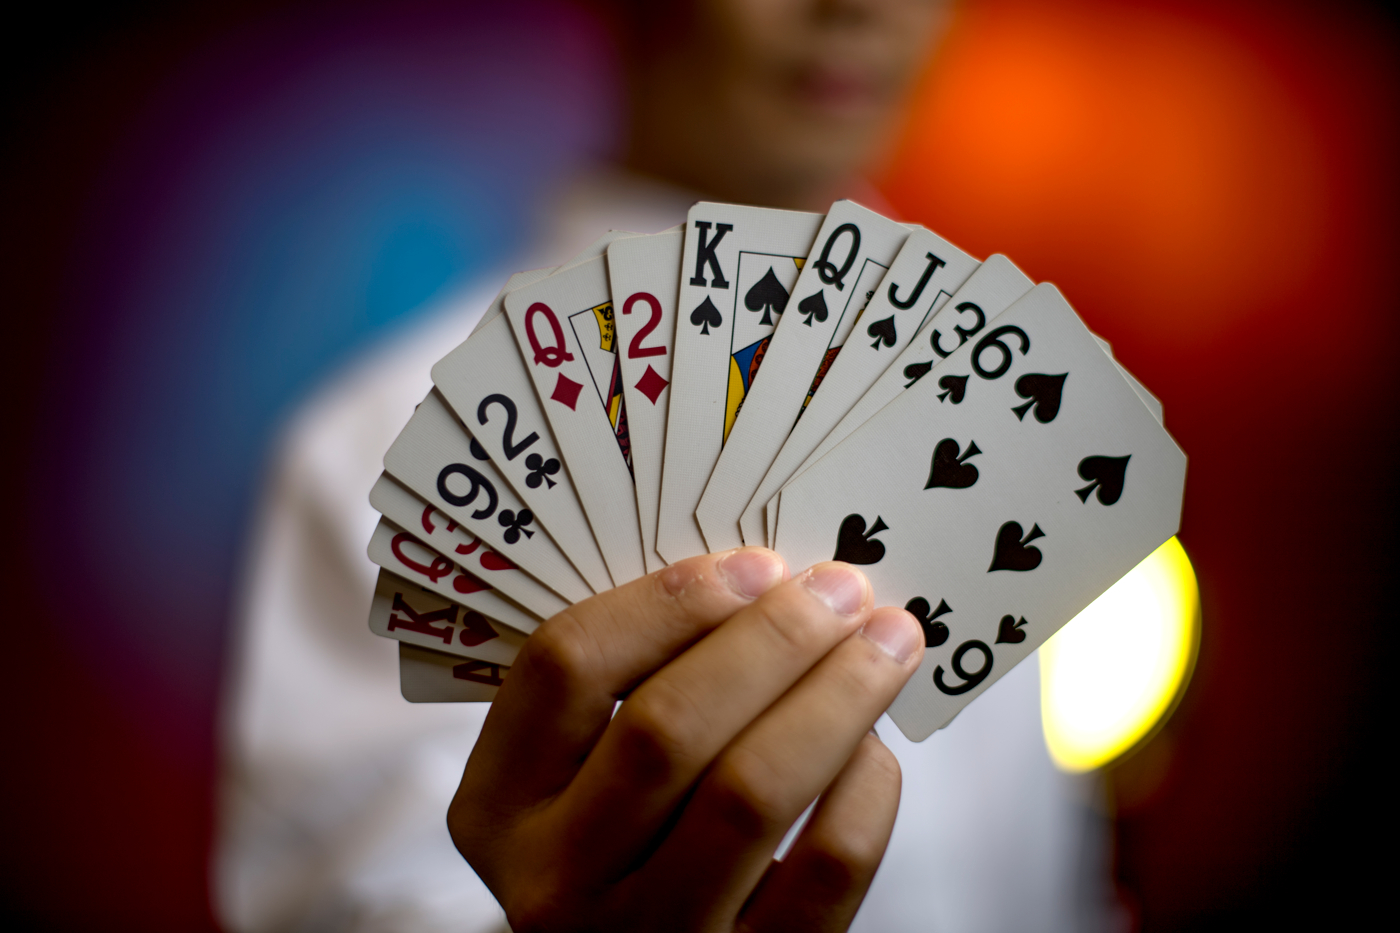 How to Play Bridge Card Game?